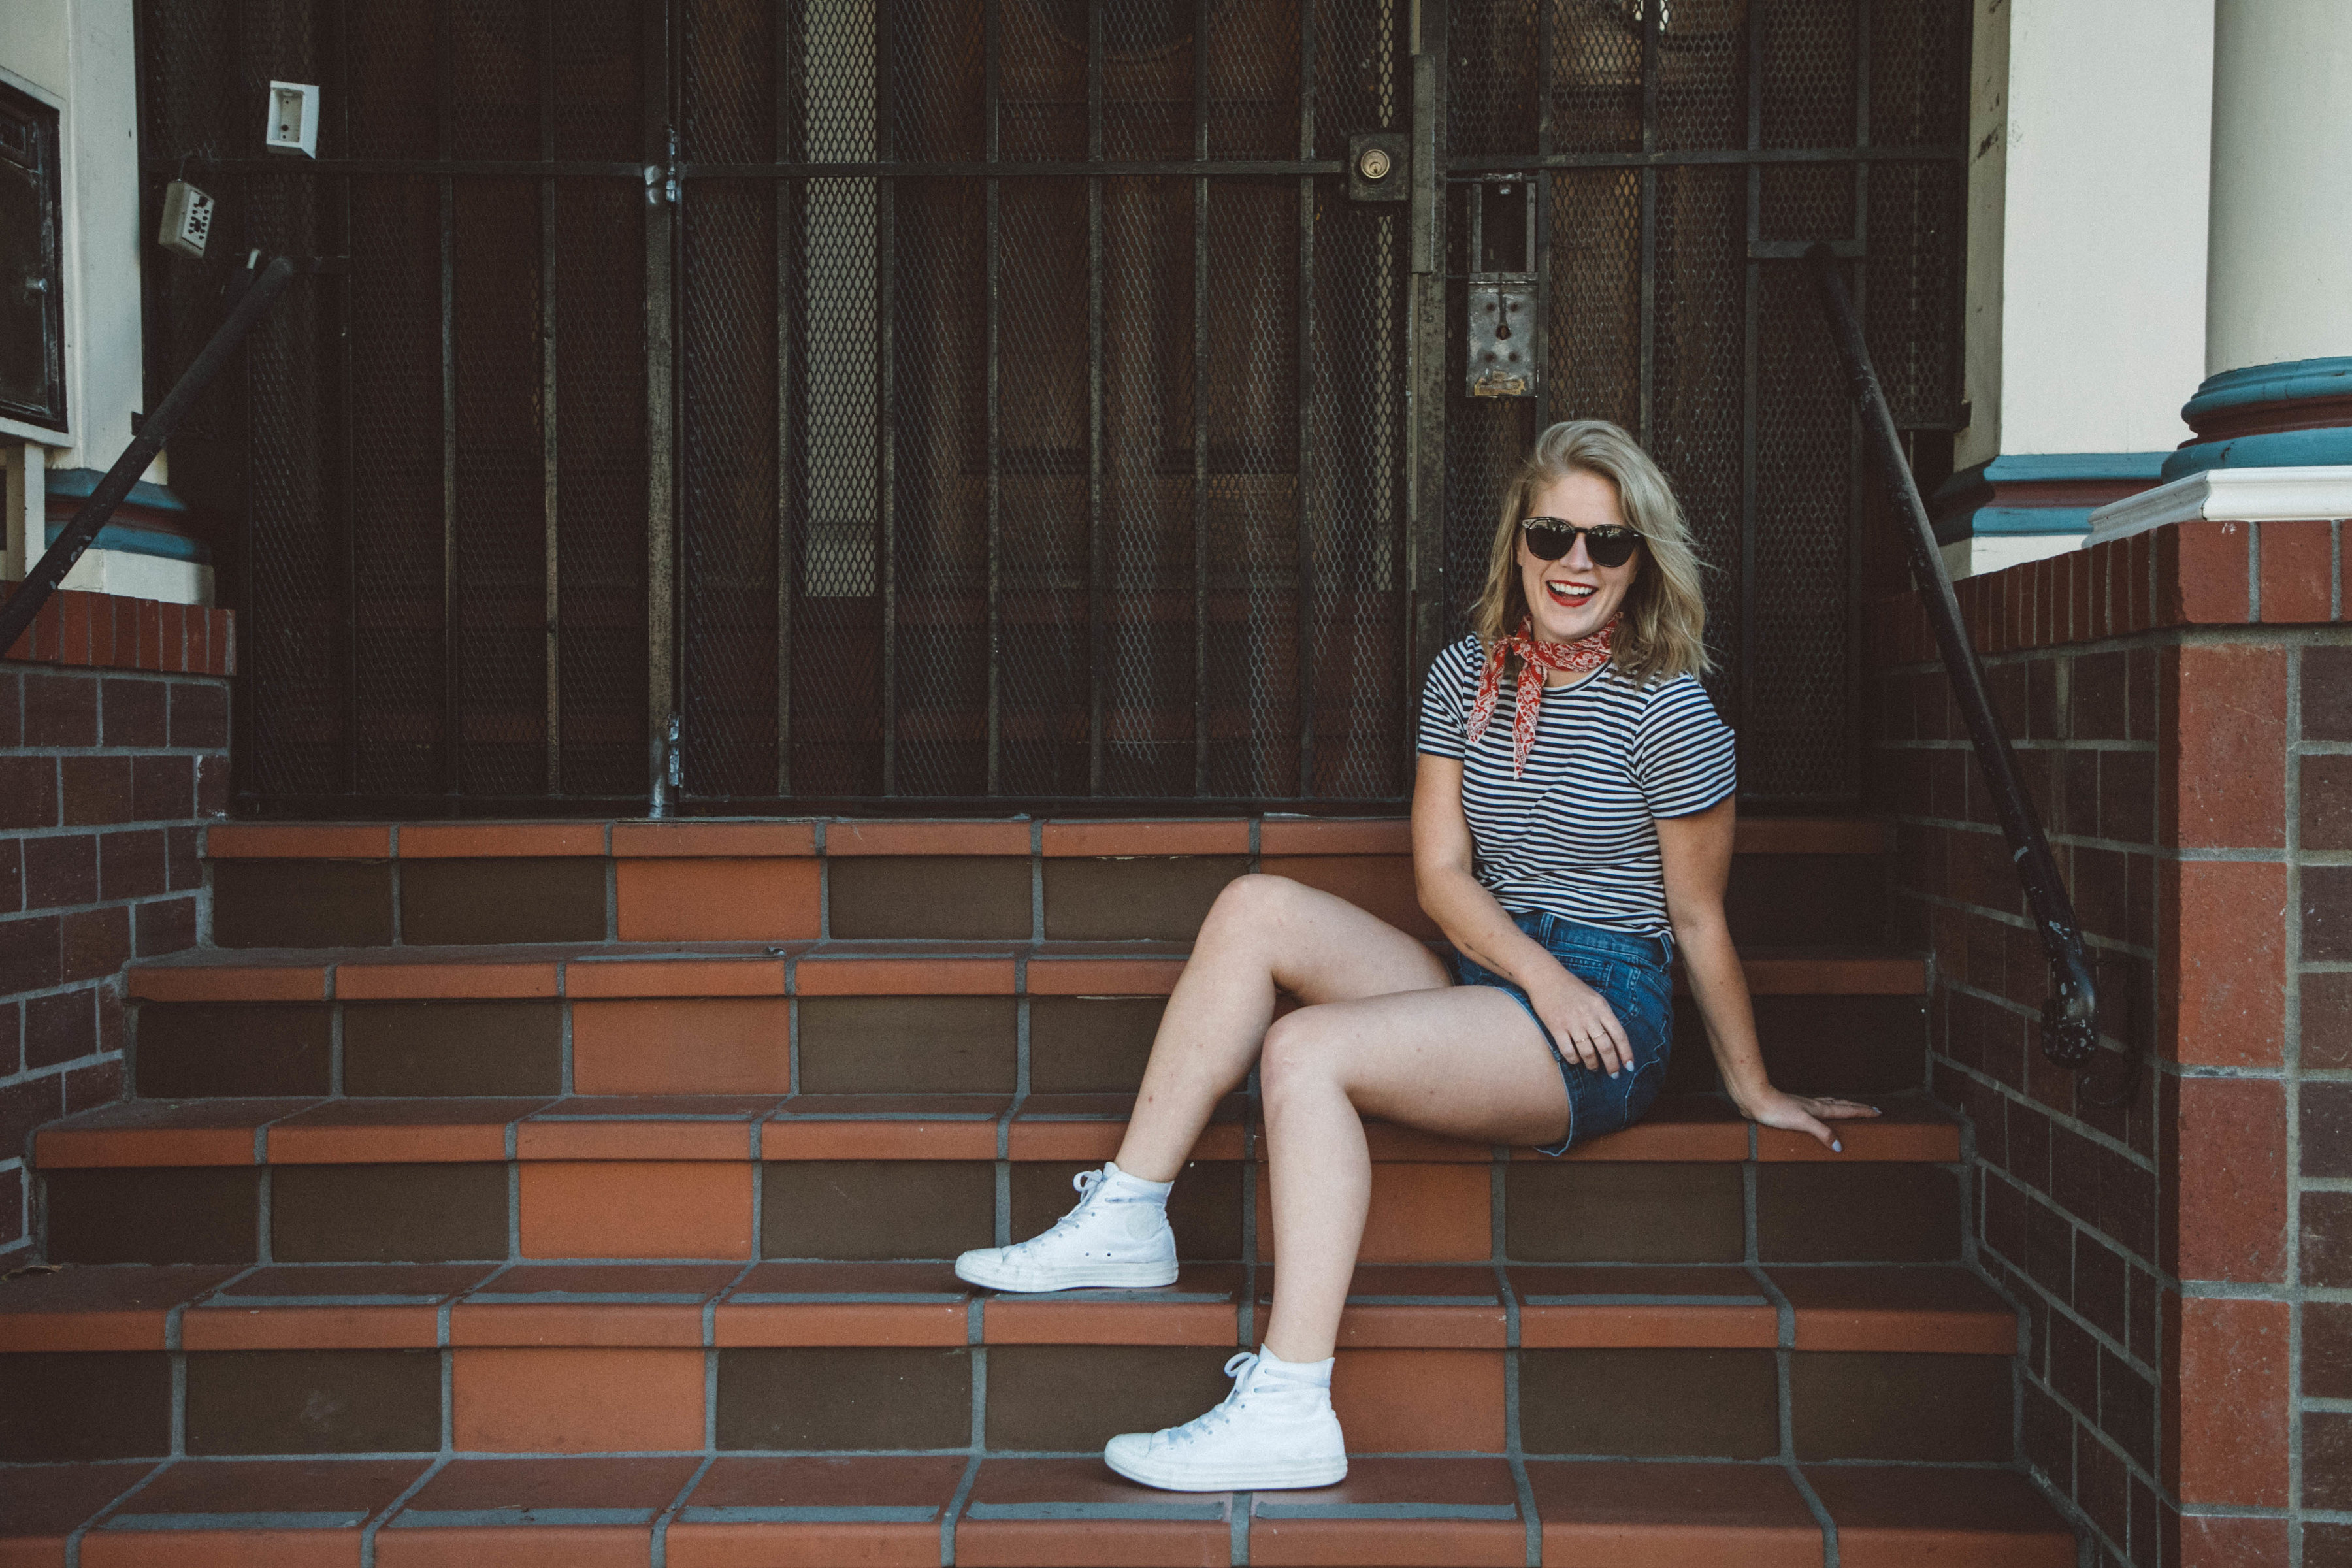 Happy 4th of July! // Celebrating in Everlane Stripes, Madewell Denim Shorts and Converse High Top Sneakers.